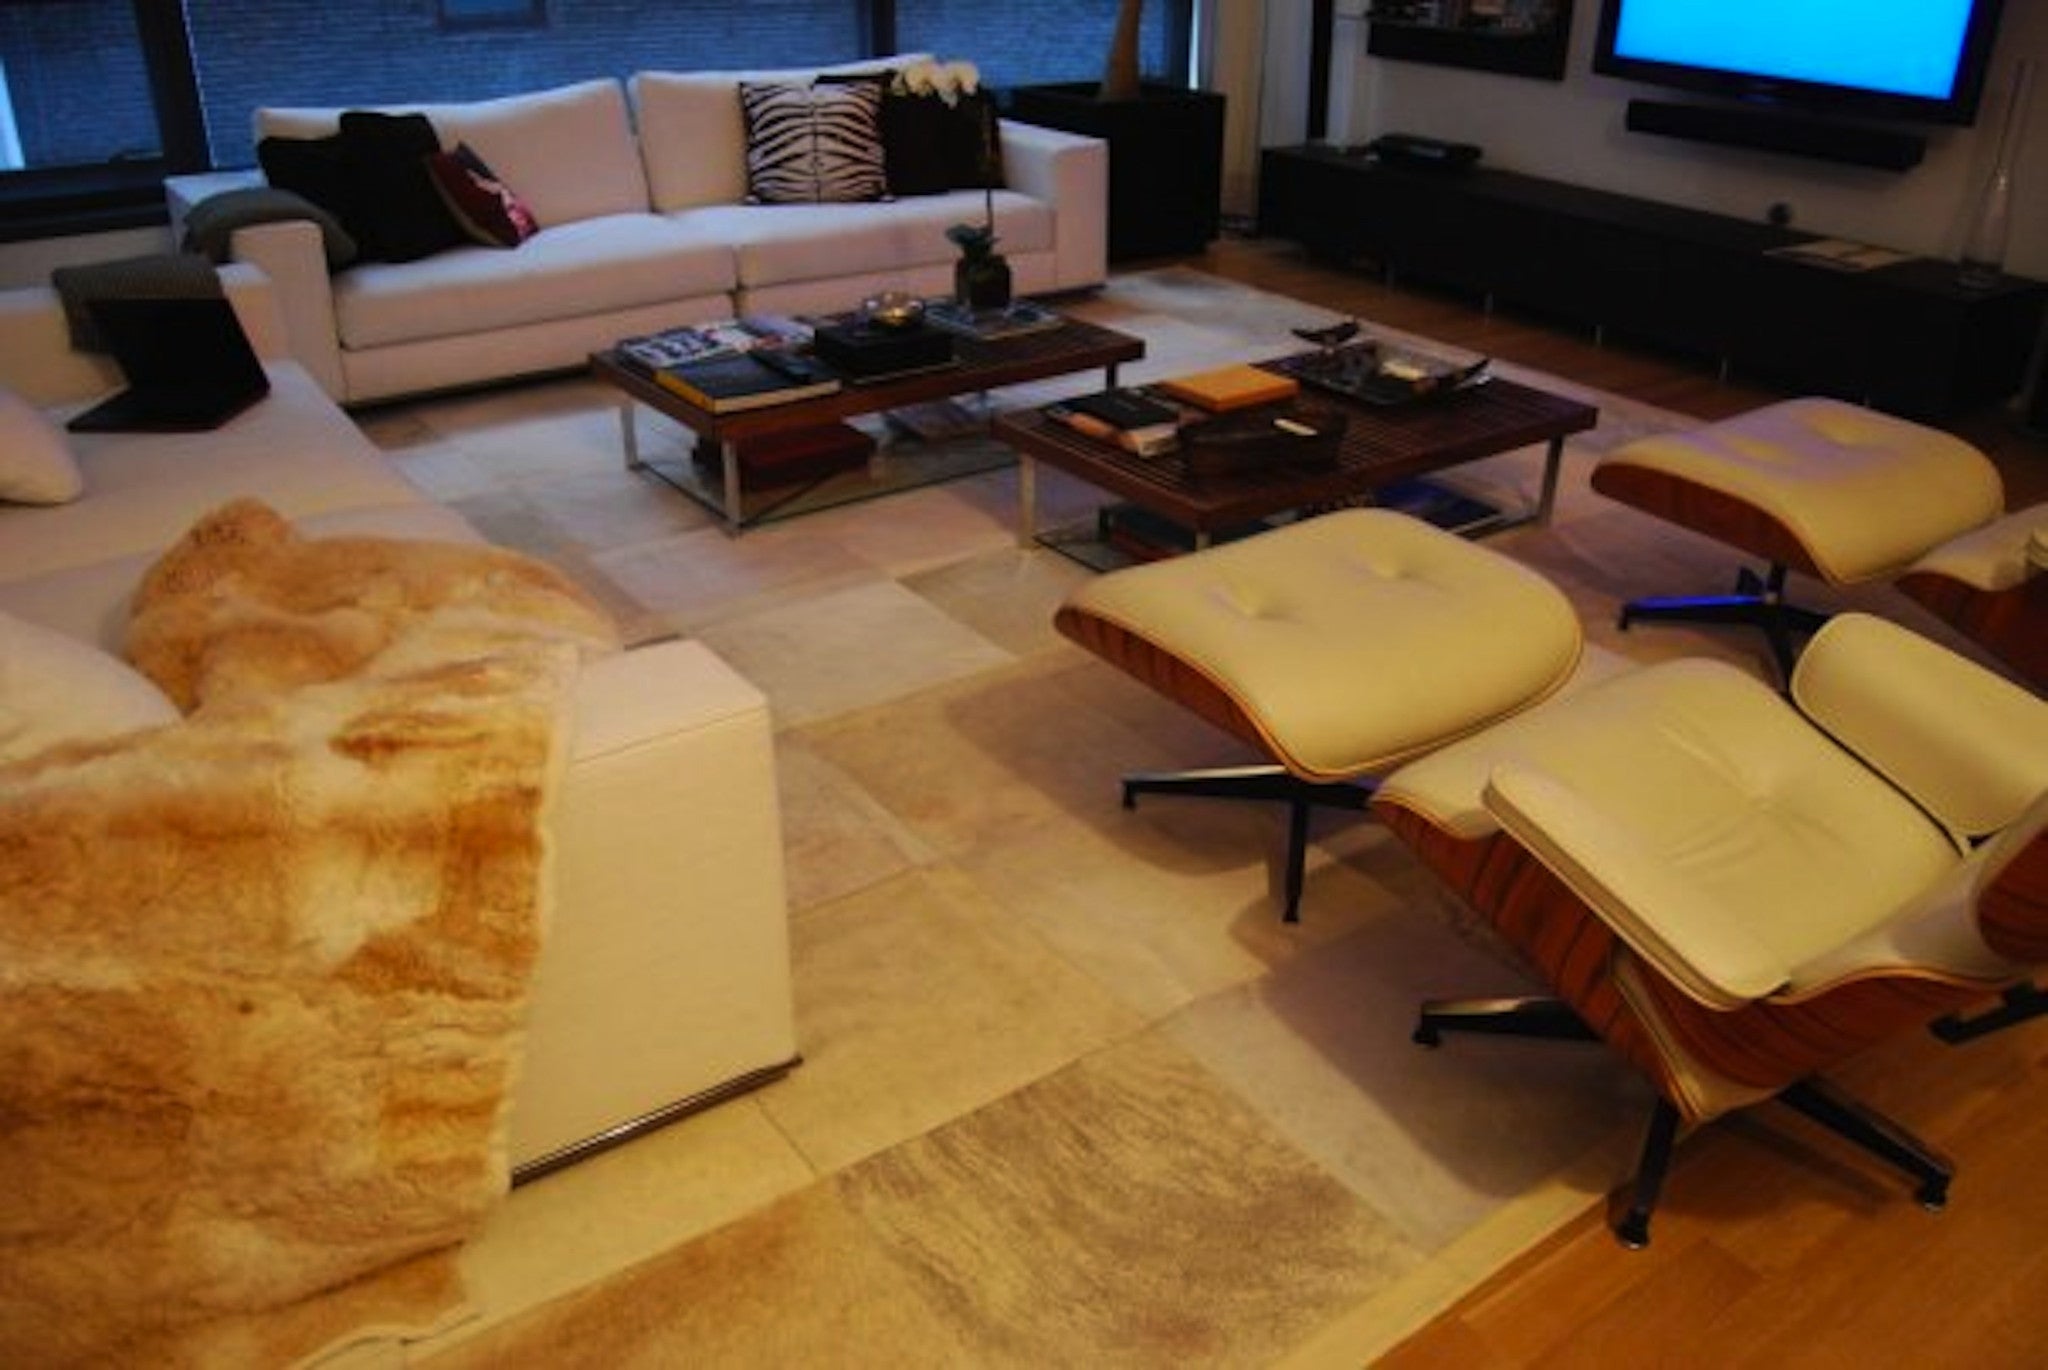 Custom Cowhide Rugs Patchwork Your Design To Order